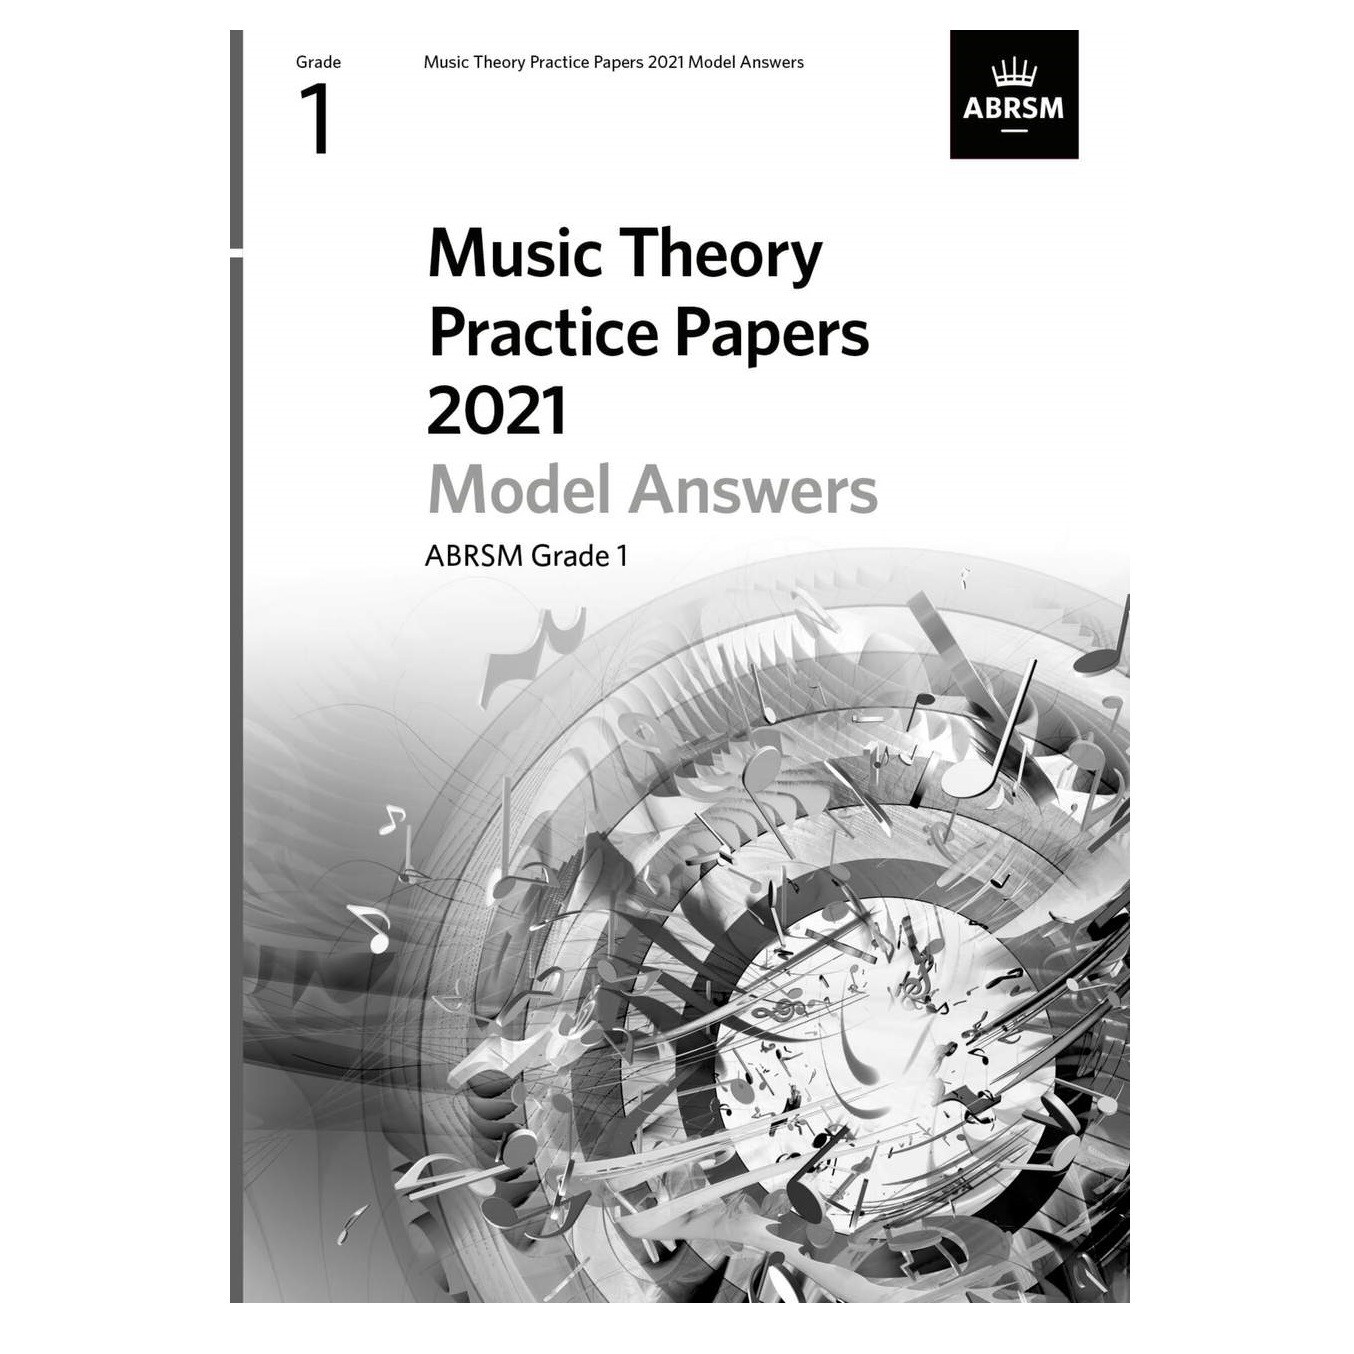 ABRSM Music Theory Practice Papers 2021 Model Answers: Grade 1